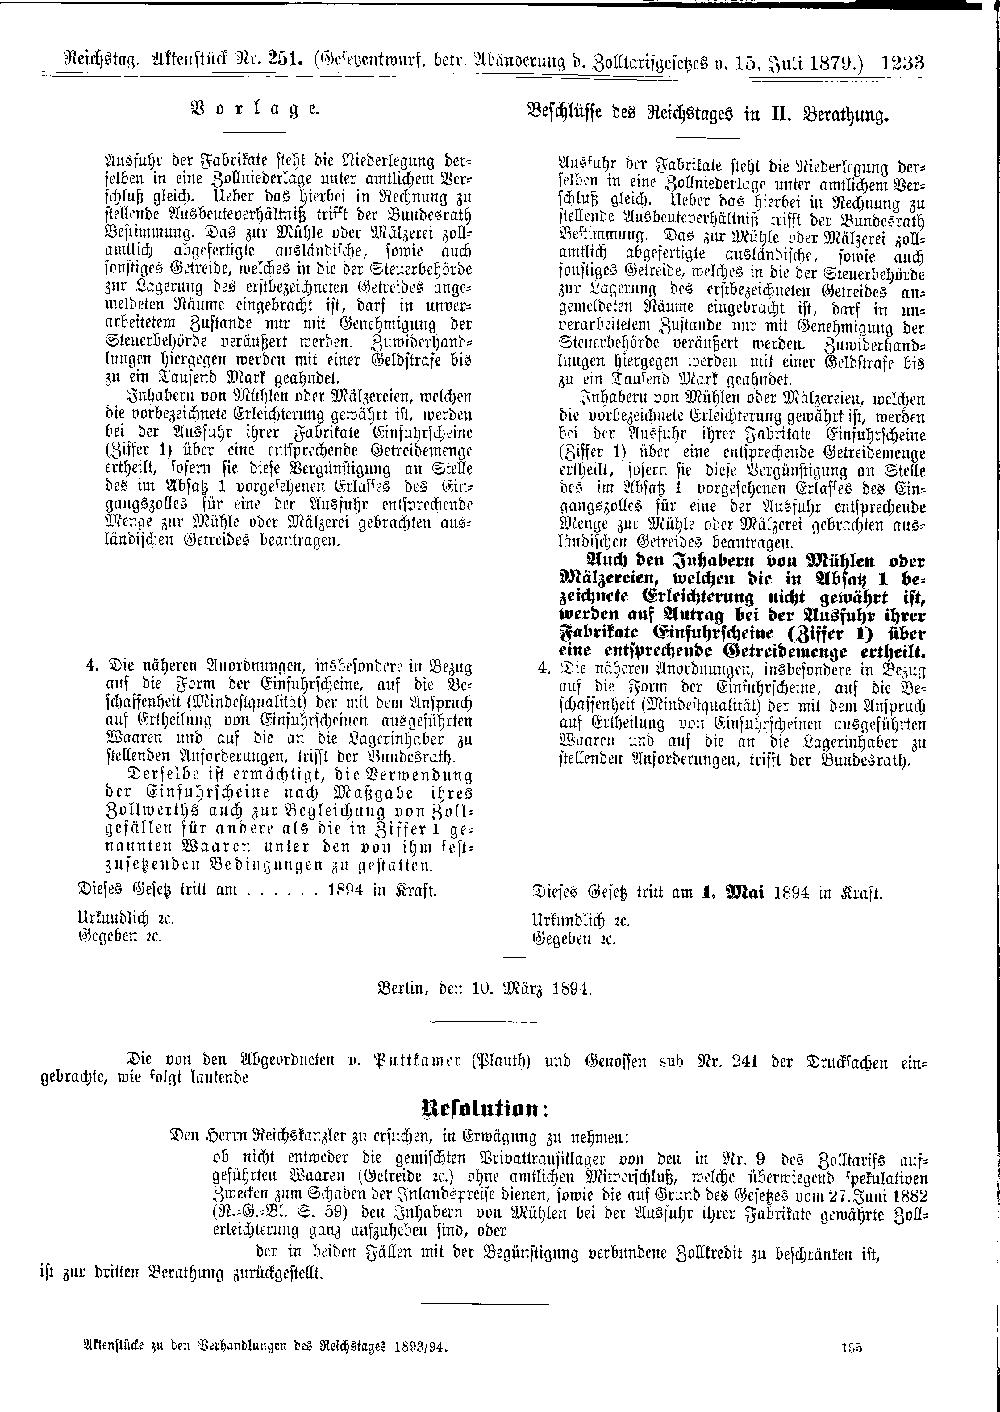 Scan of page 1233